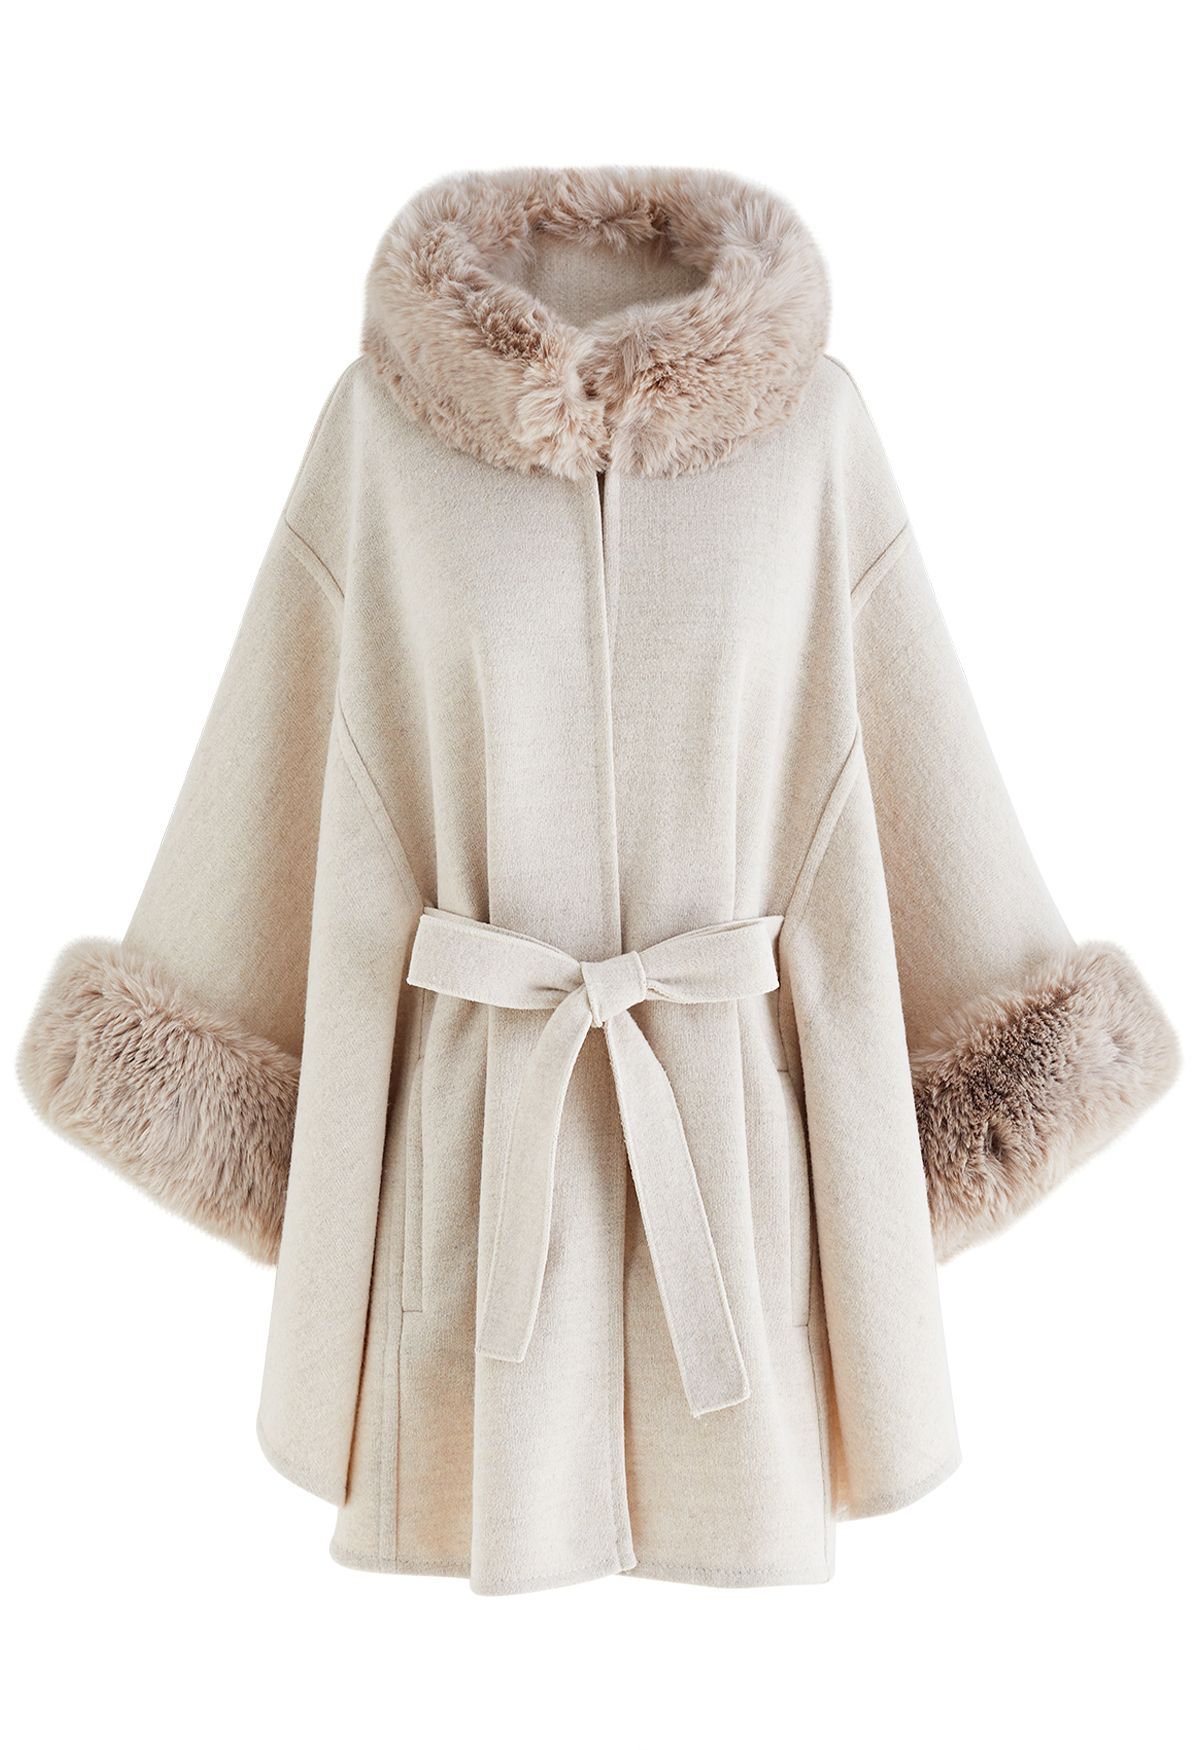 Self-Tie Bowknot Faux Fur Poncho in Oatmeal | Chicwish